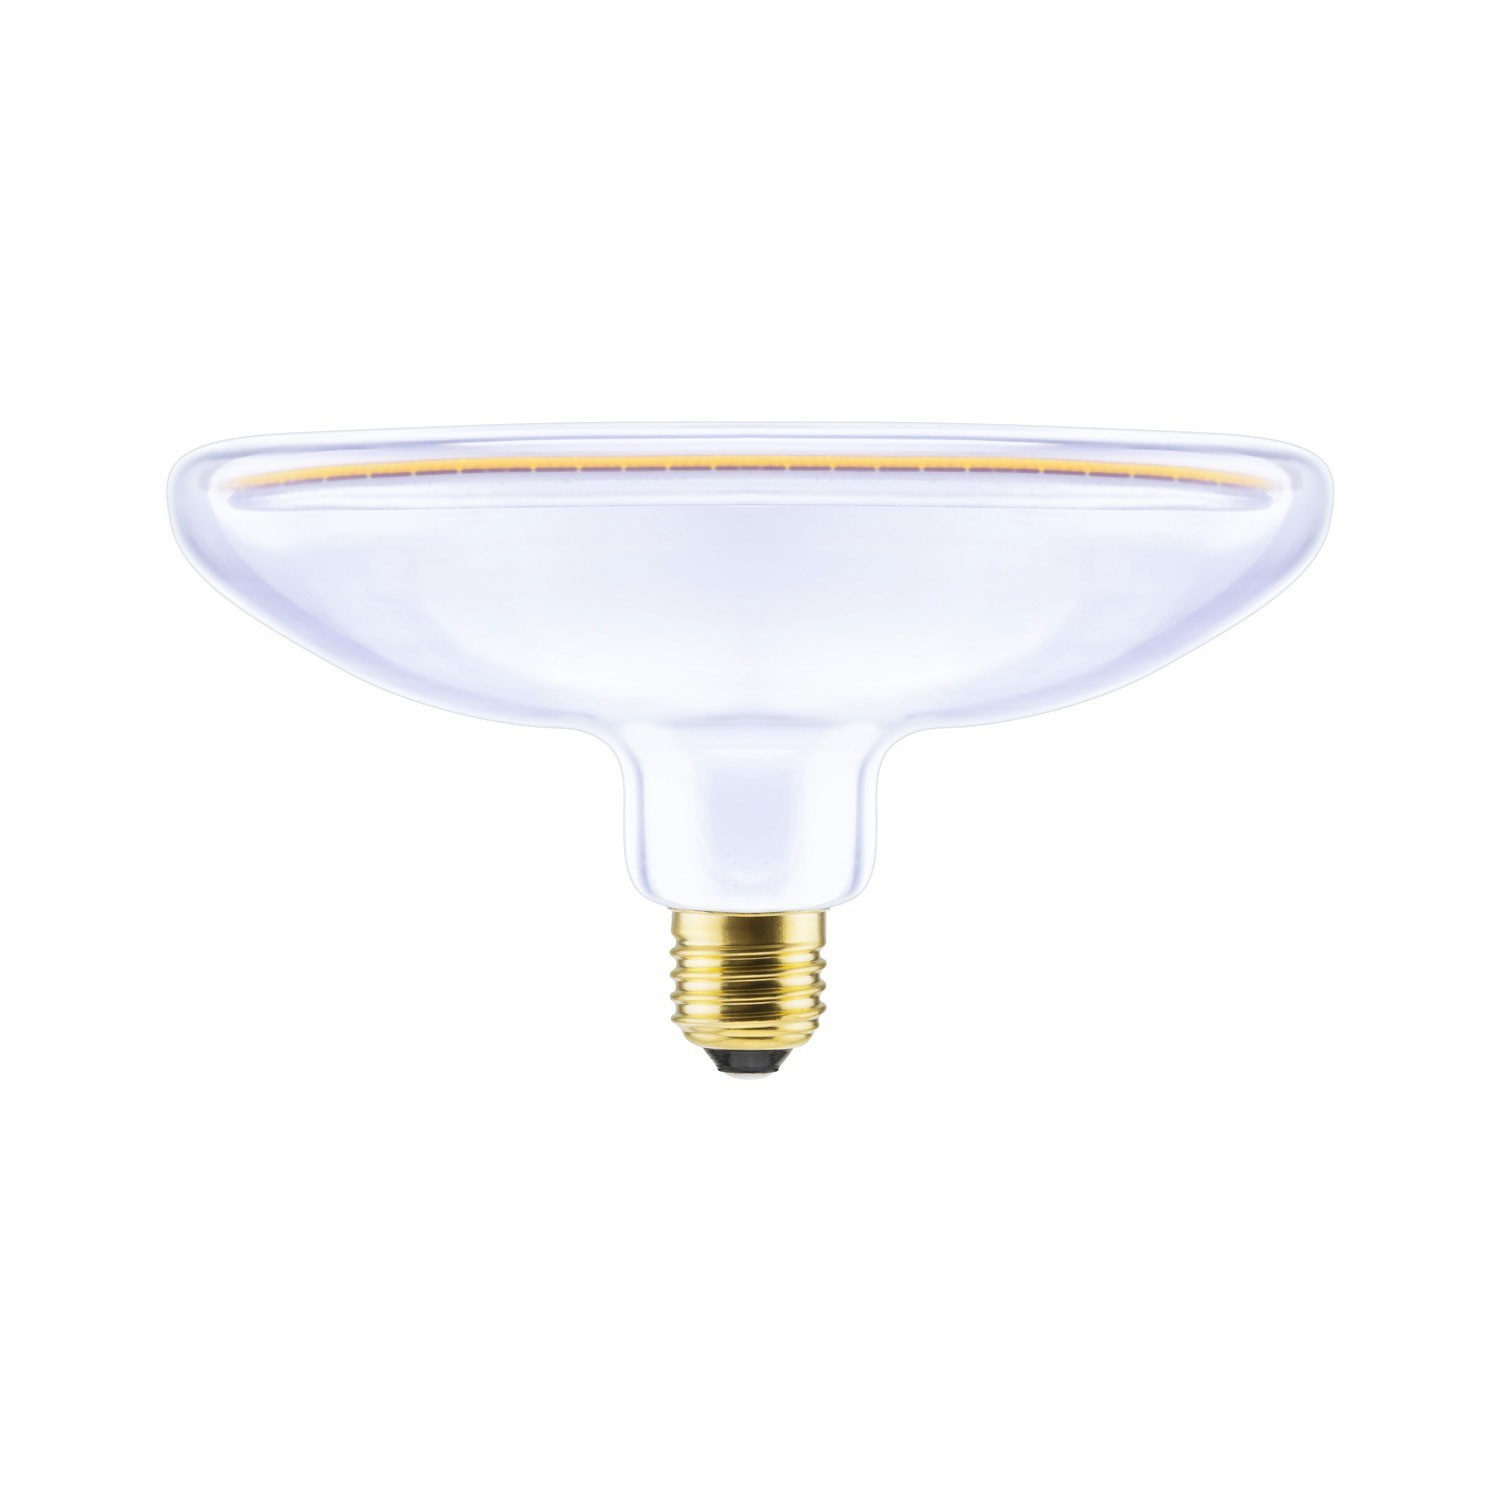 LED Reflector R200 Clear Floating Line 6W 330Lm 1900K bulb Dimmable